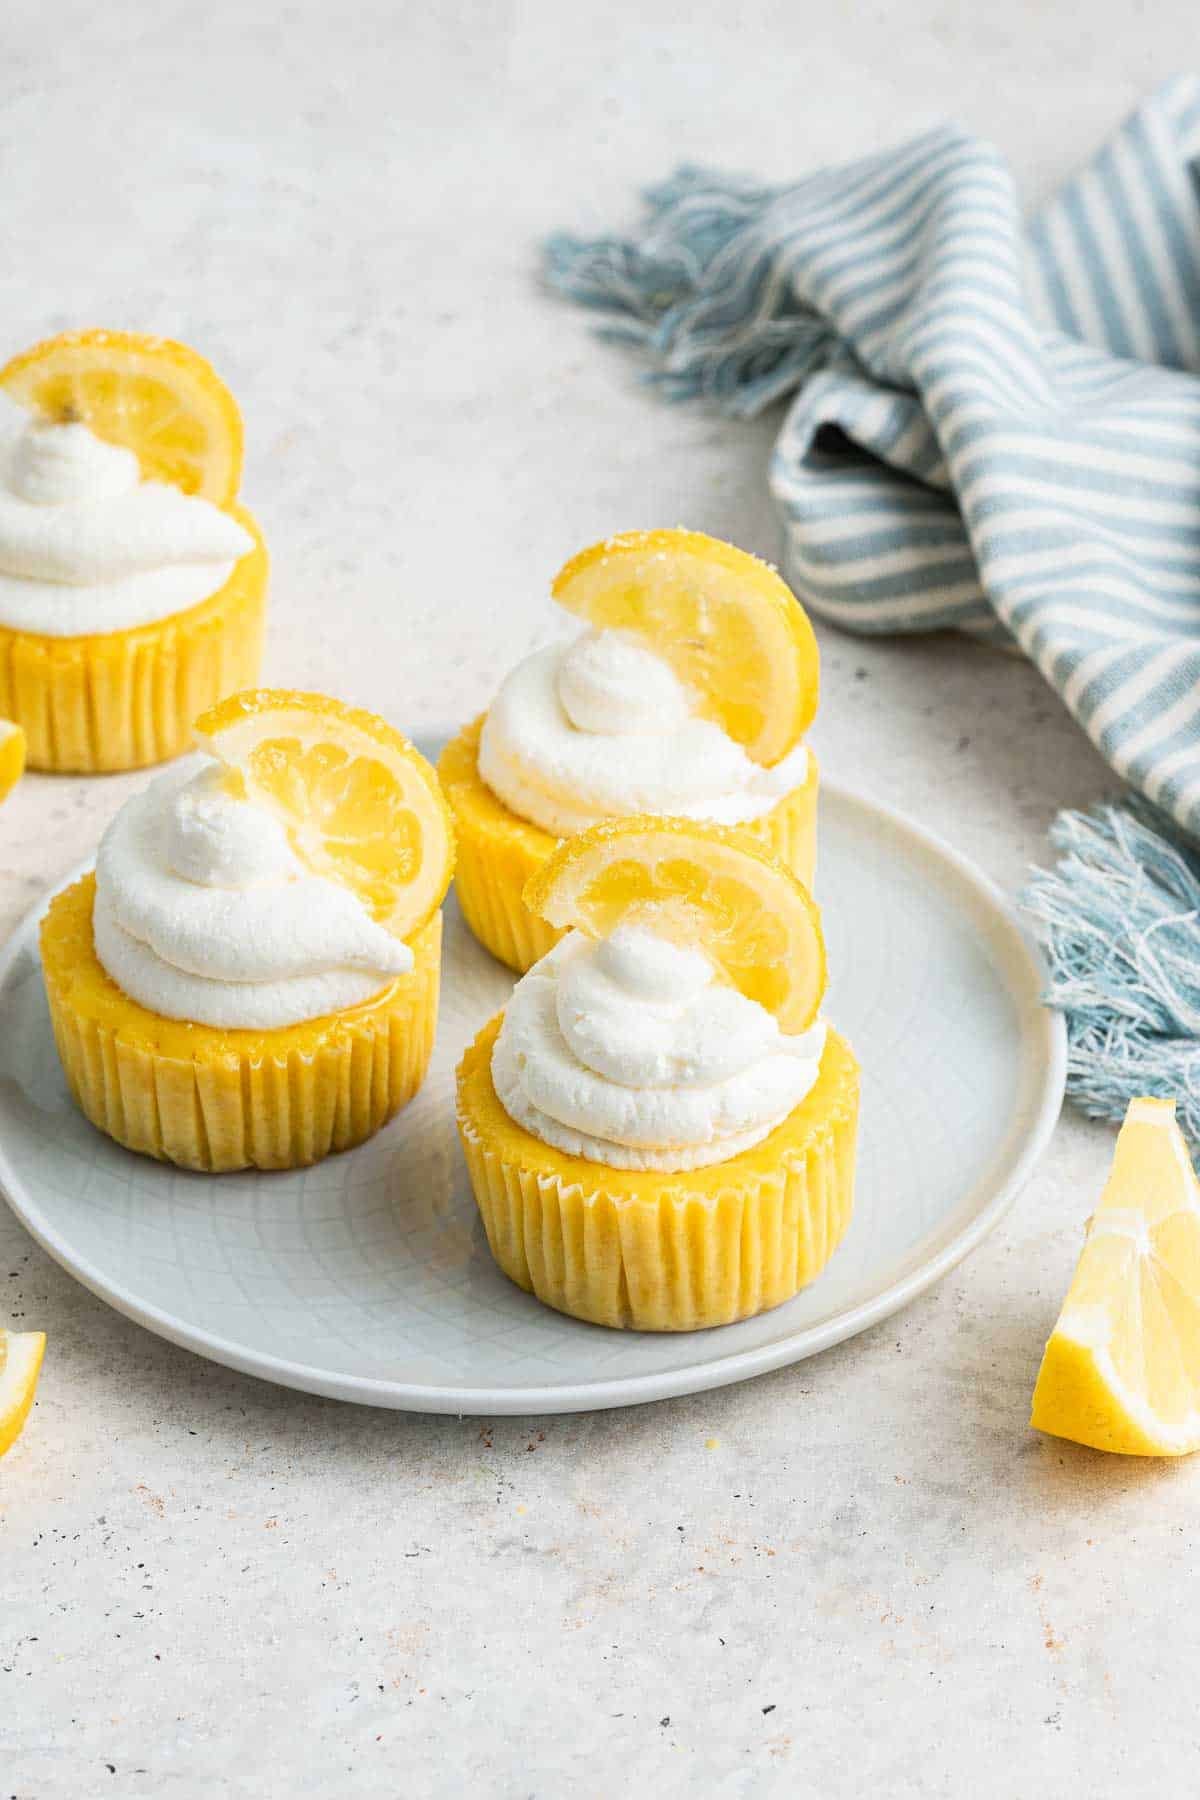 Three mini lemon cheesecakes on a grey plate garnished with whipped cream and lemon slices.